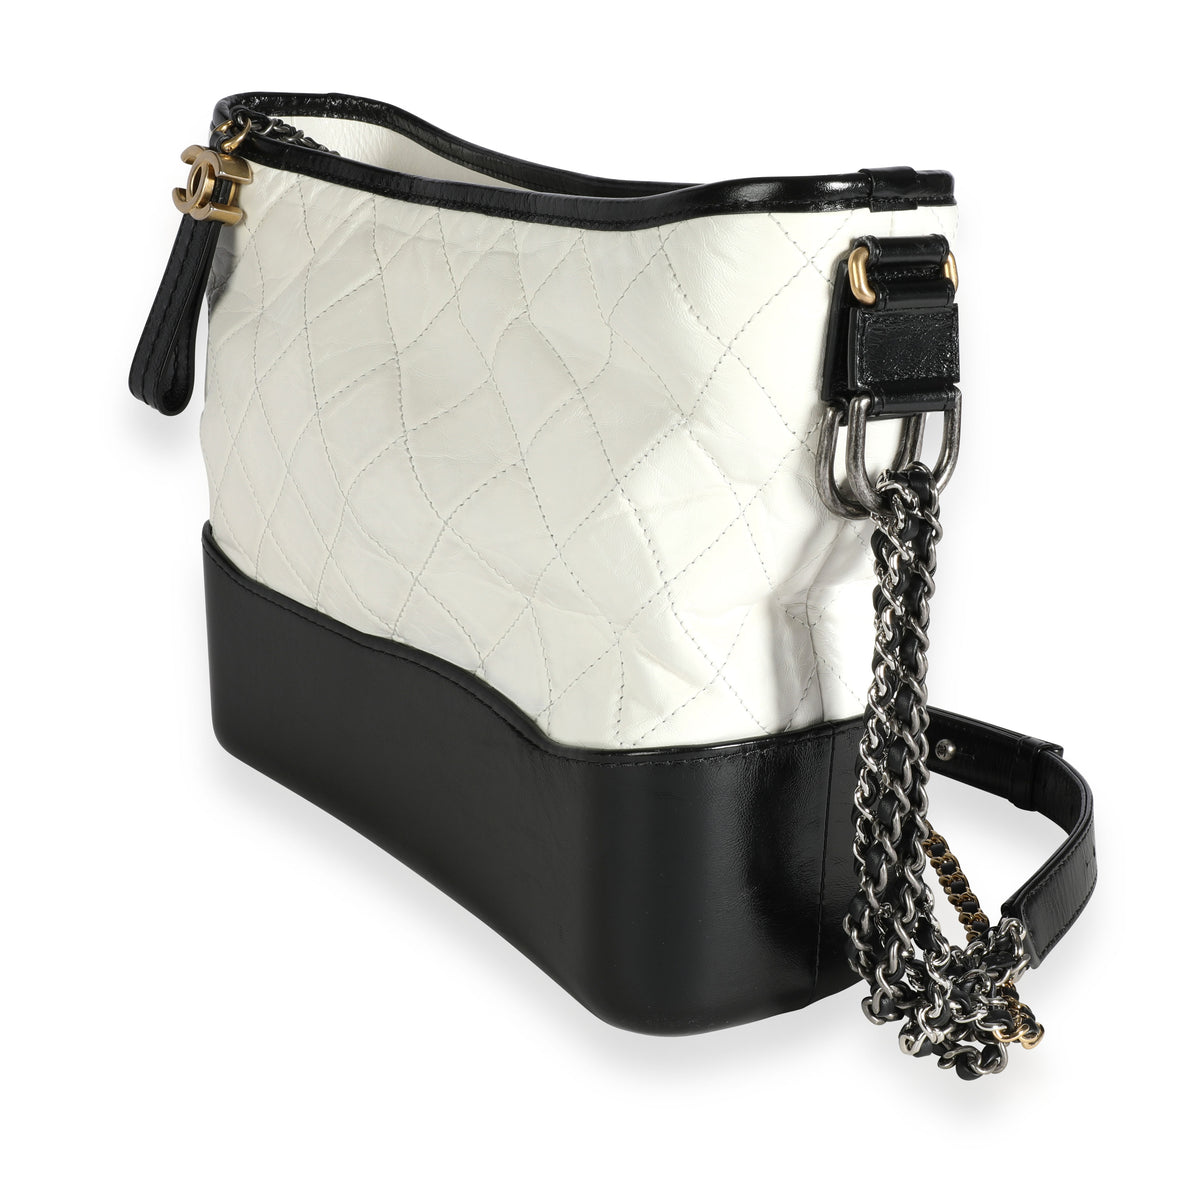 Chanel Black & White Quilted Aged Calfskin Large Gabrielle Hobo